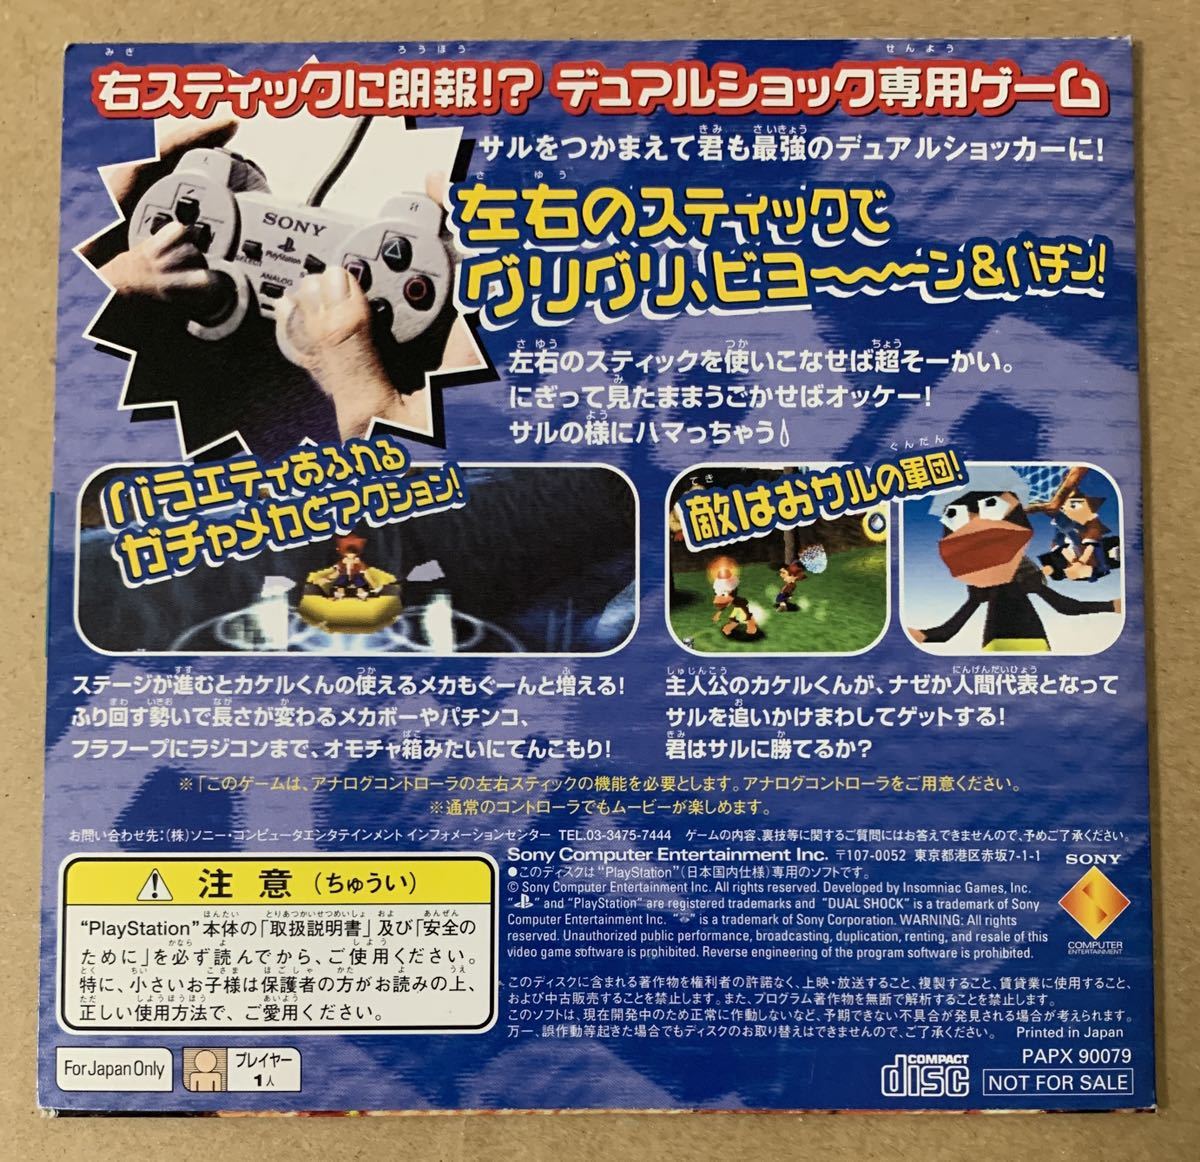 PS サルゲッチュ 体験版 非売品 デモ demo not for sale PAPX 90079 Ape Escape プレイステーション_画像2